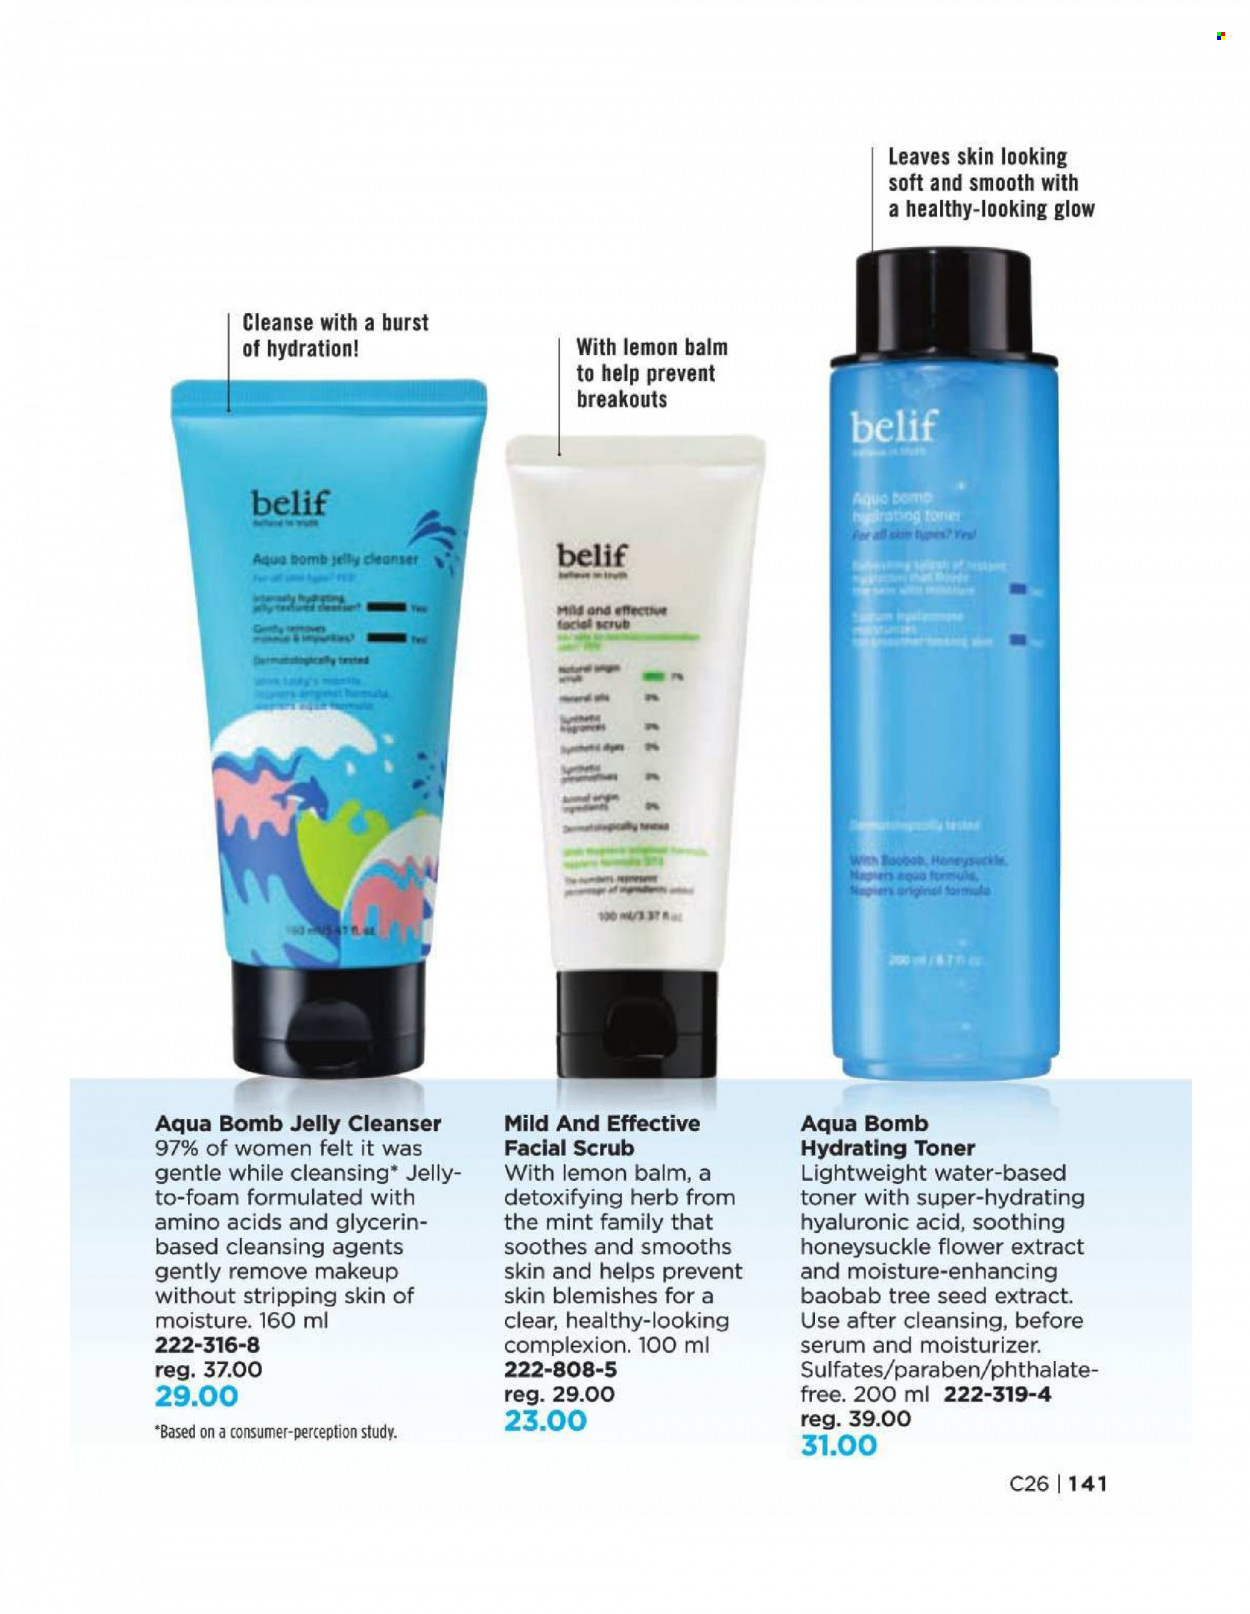 thumbnail - Avon Flyer - Sales products - moisturizer, serum, toner, jelly cleanser, makeup. Page 141.